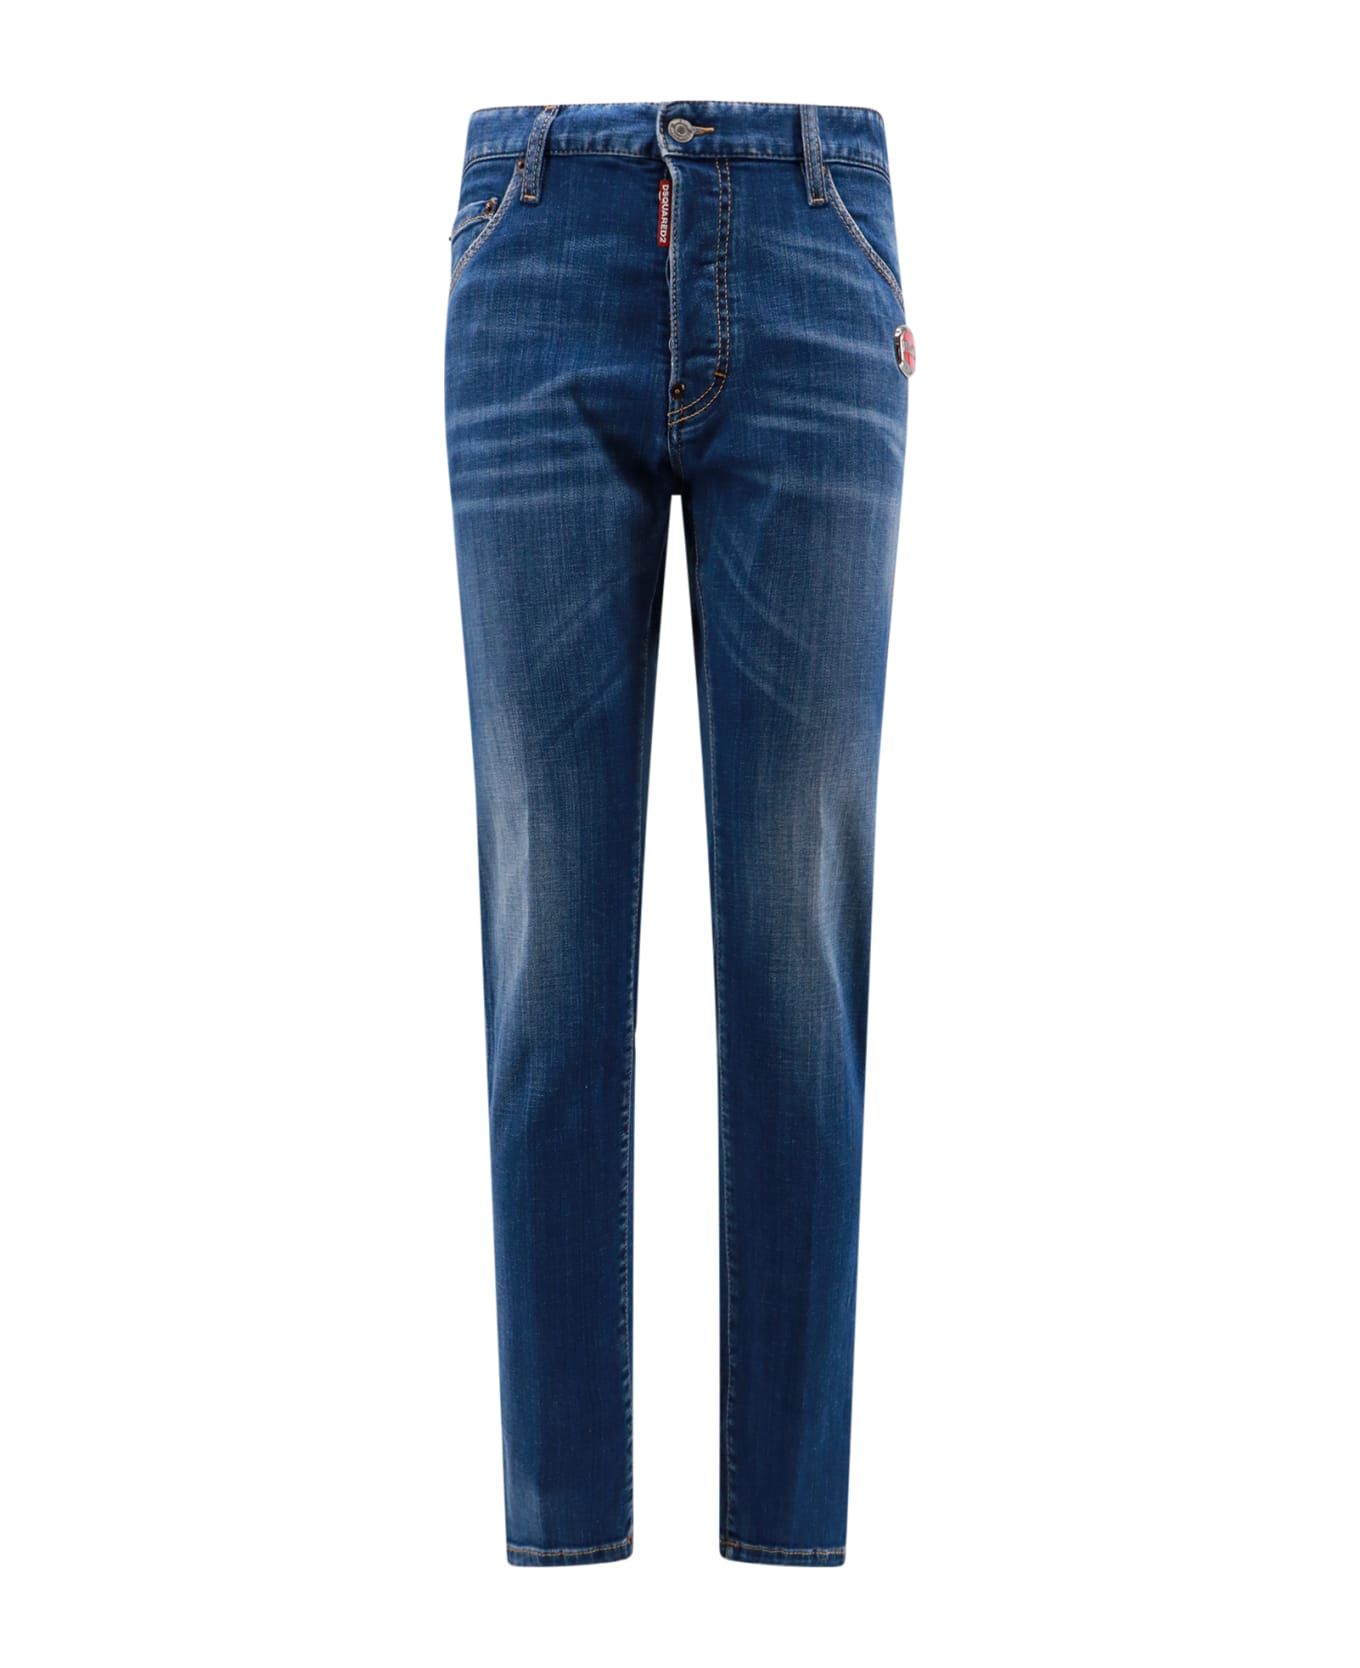 Dsquared2 Cool Guy Jeans - Blue デニム